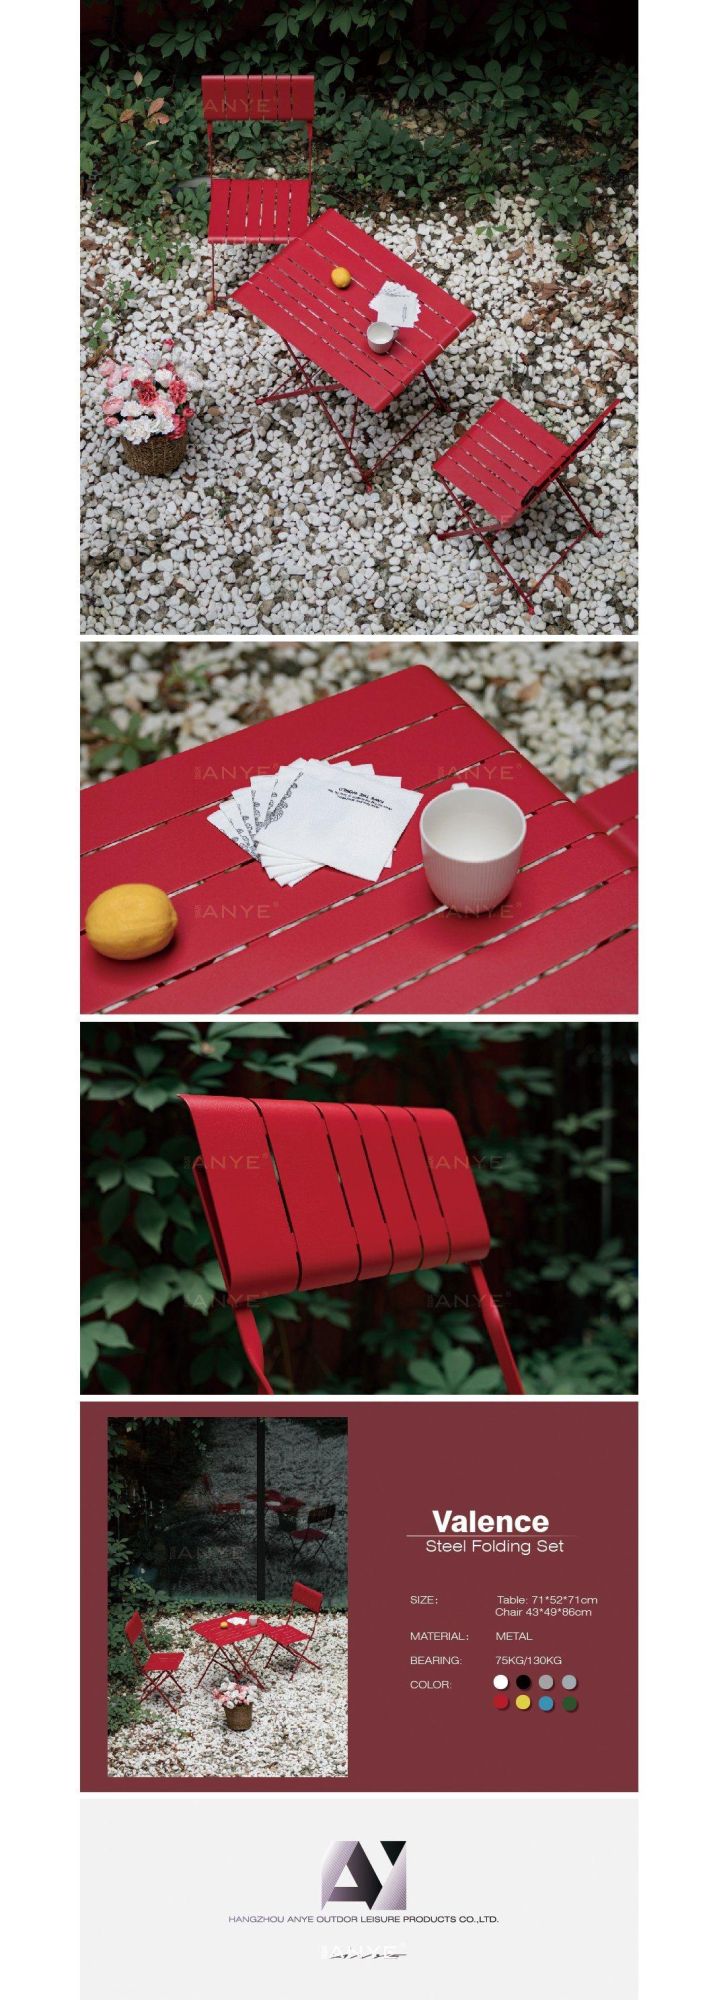 Backyard Rust Resistant Red Folding Coffee Table and Chair Set Outdoor Furniture